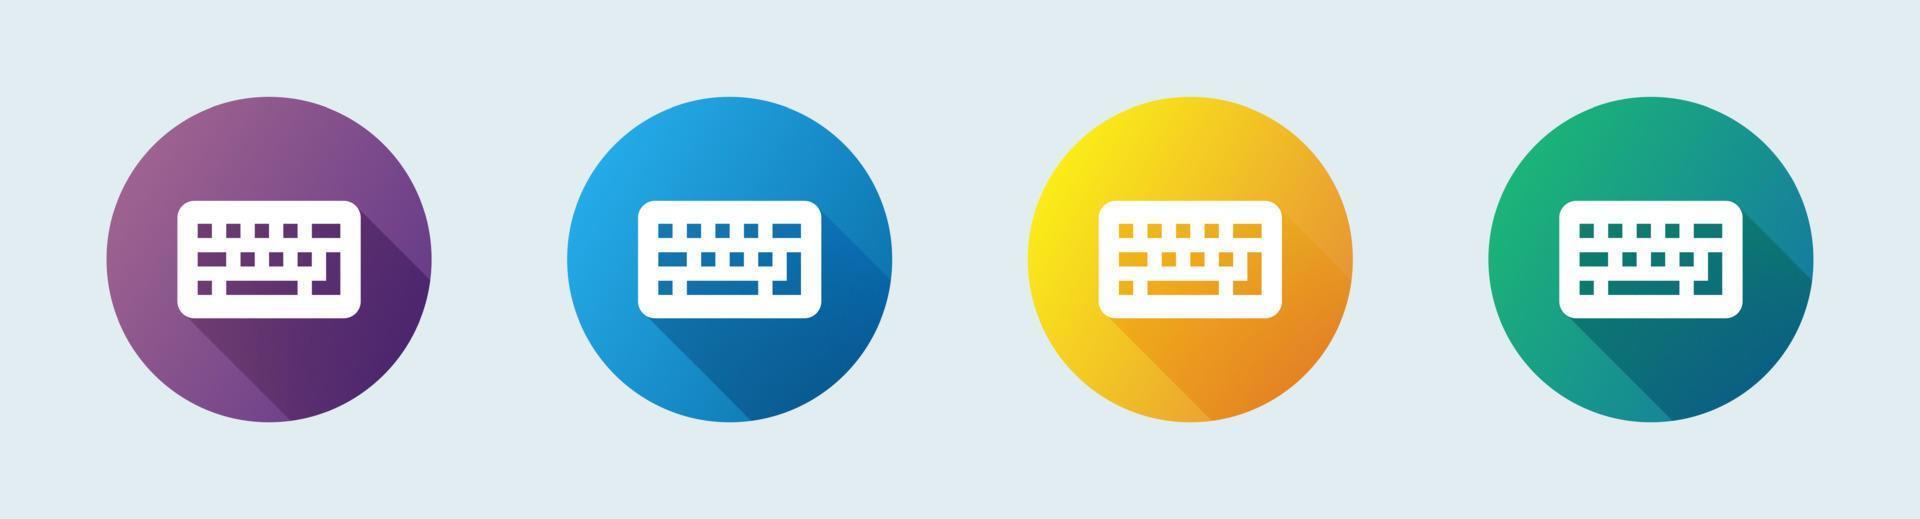 Keyboard solid icon in flat design style. Computer button signs vector illustration.